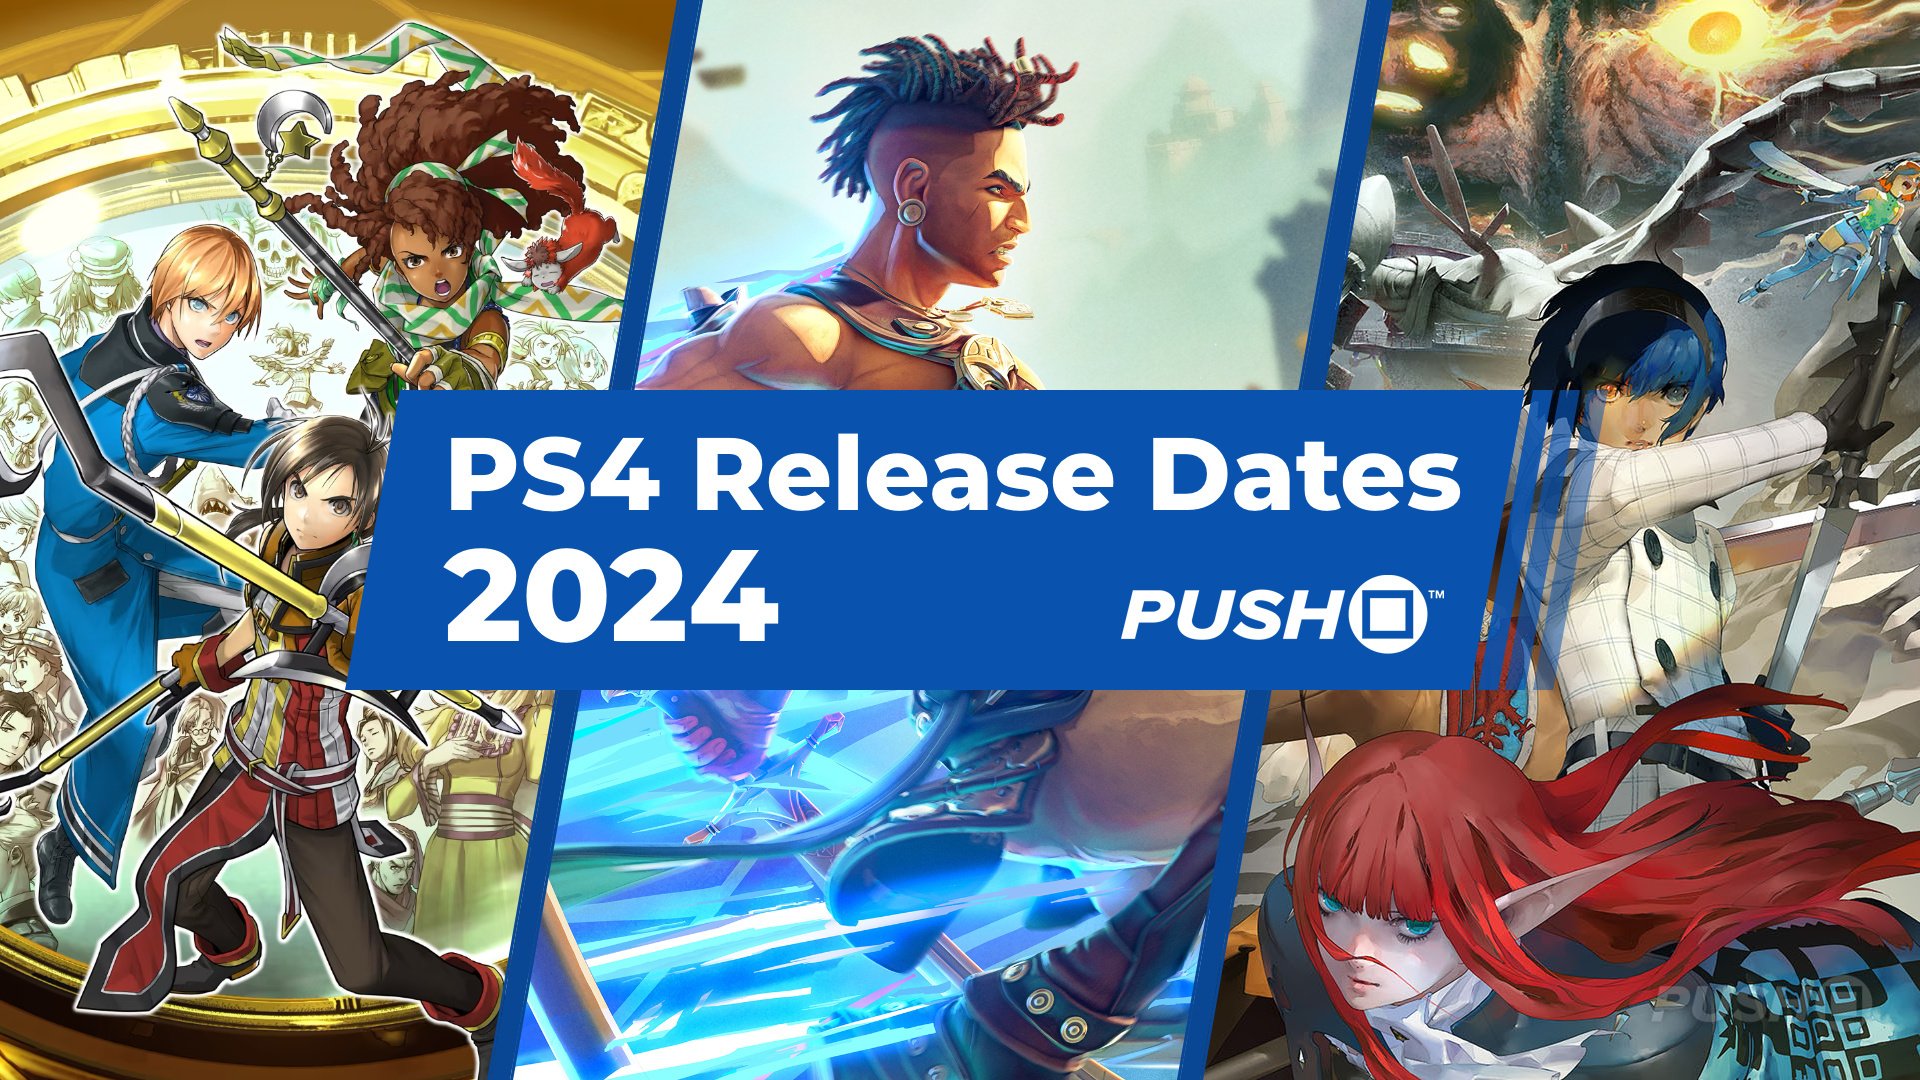 new games 2020 ps4